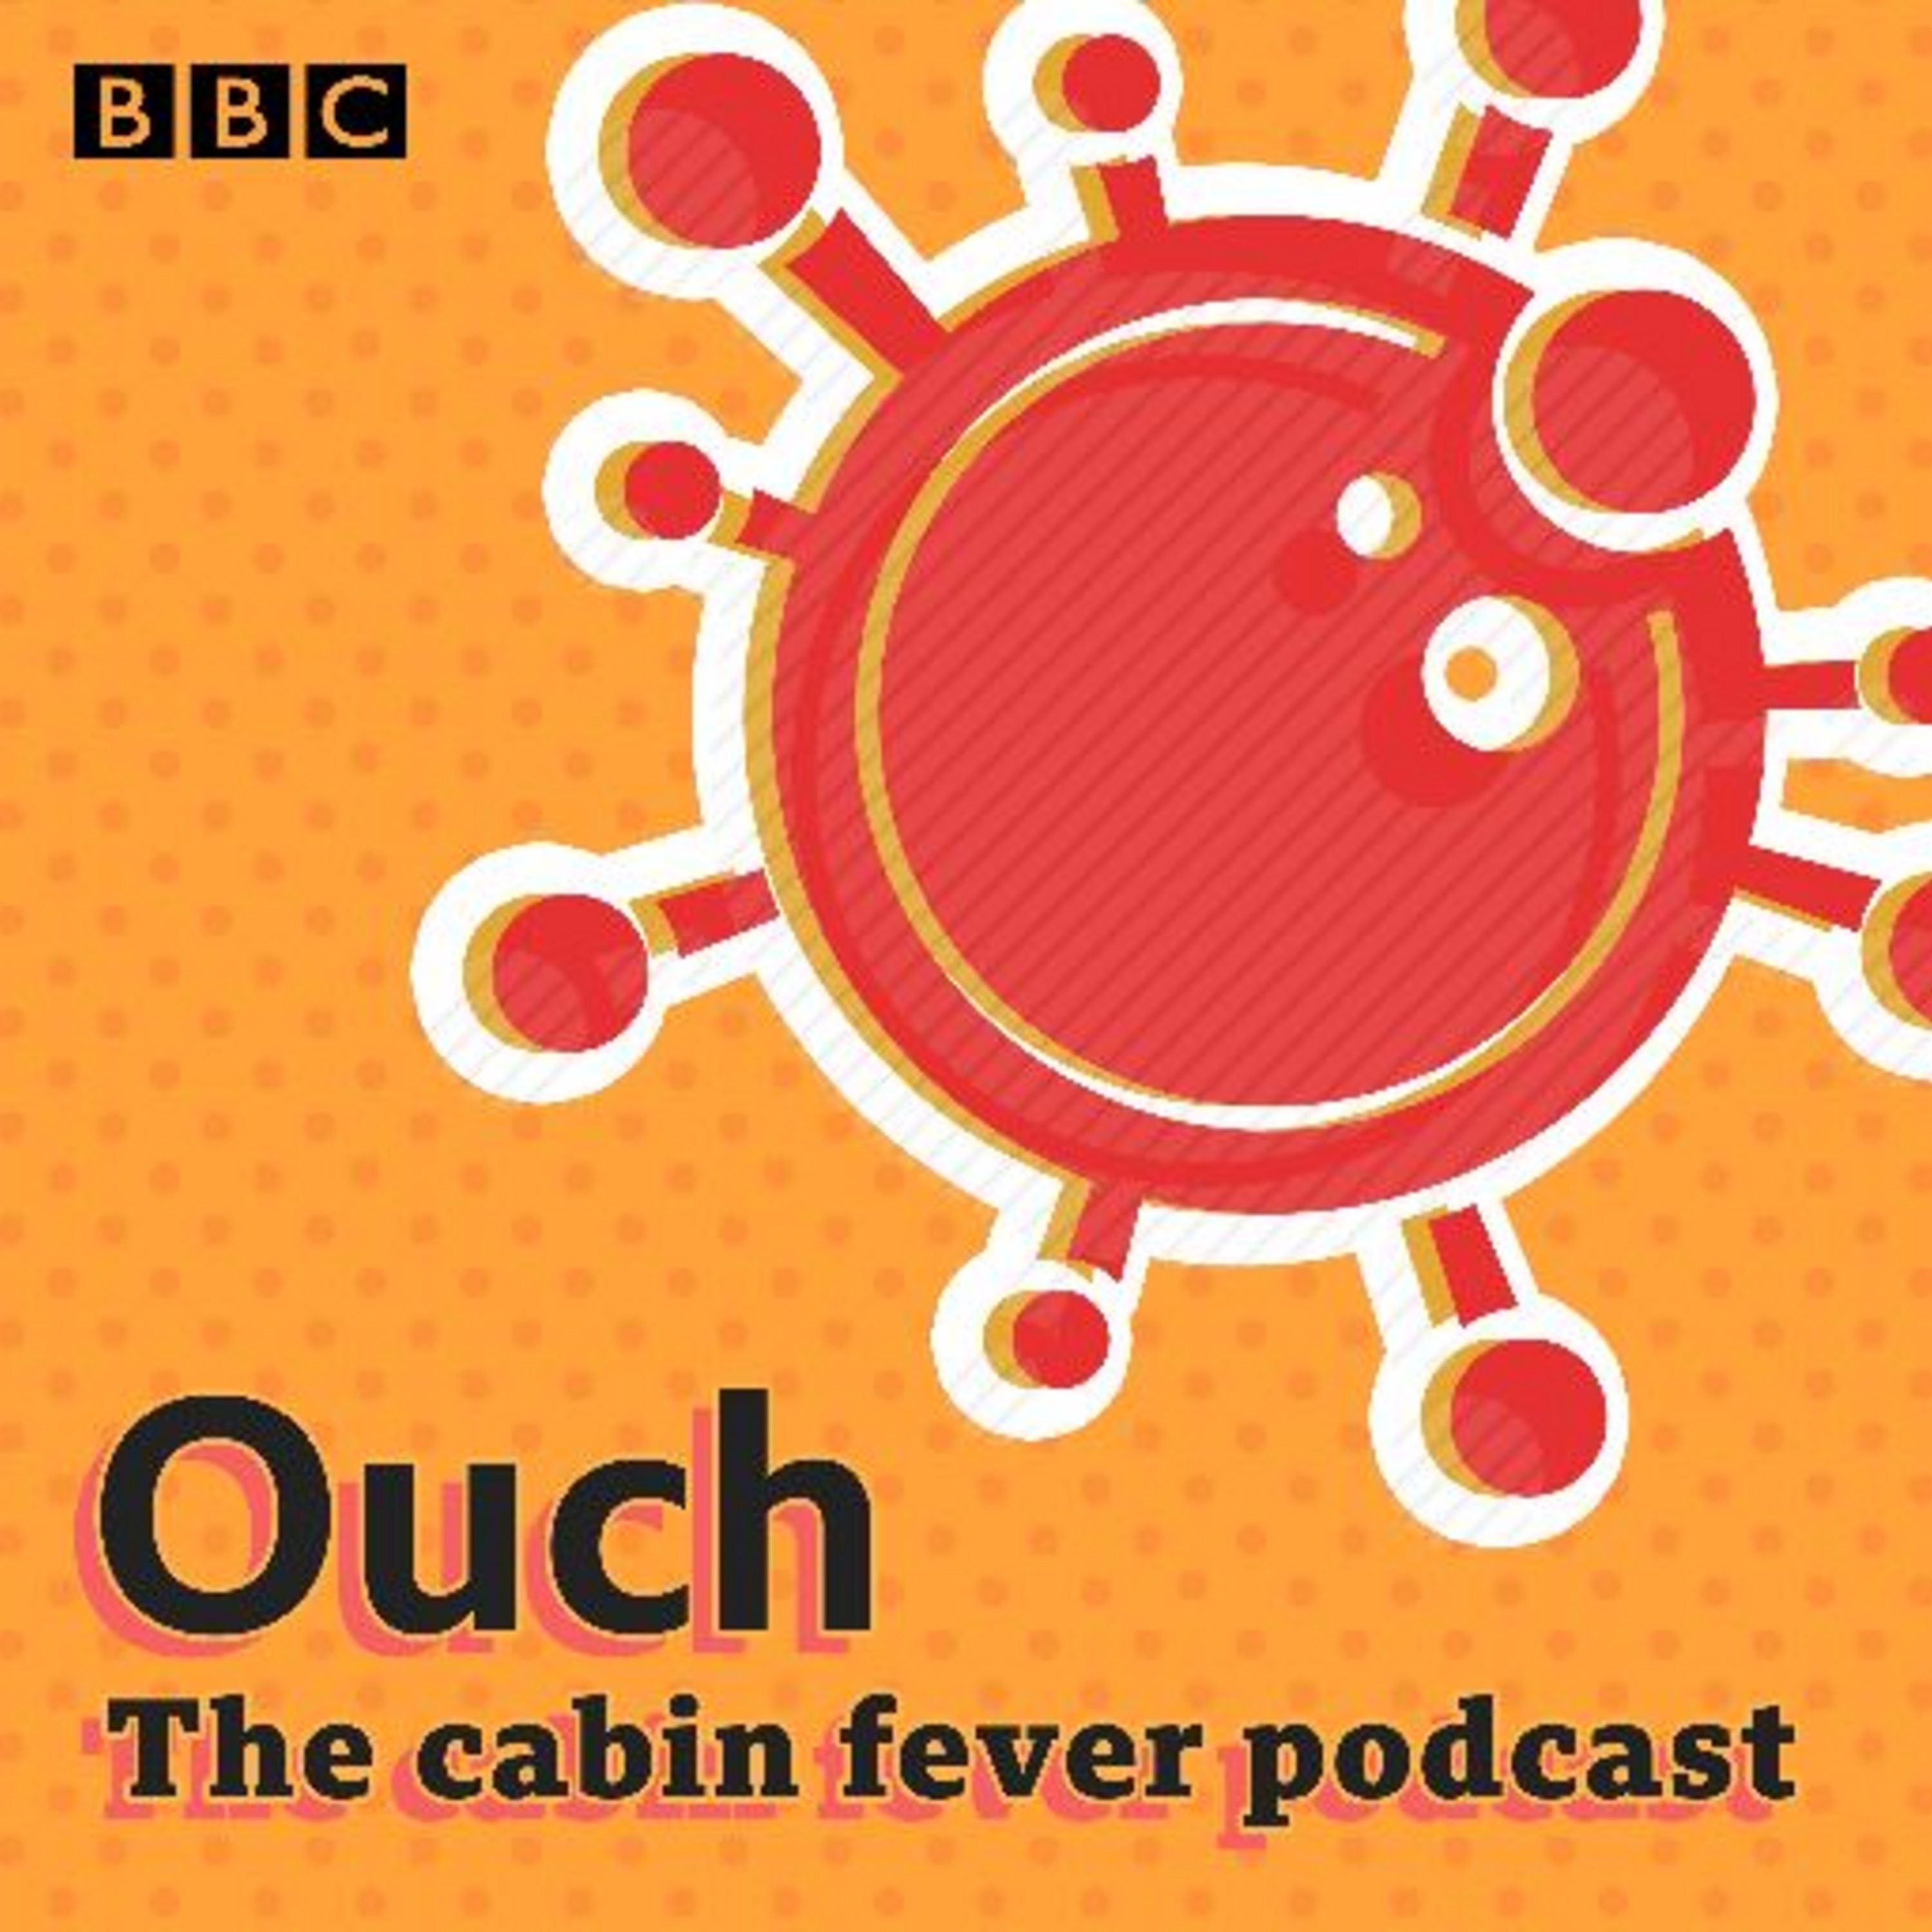 Welcome to The Cabin Fever Podcast